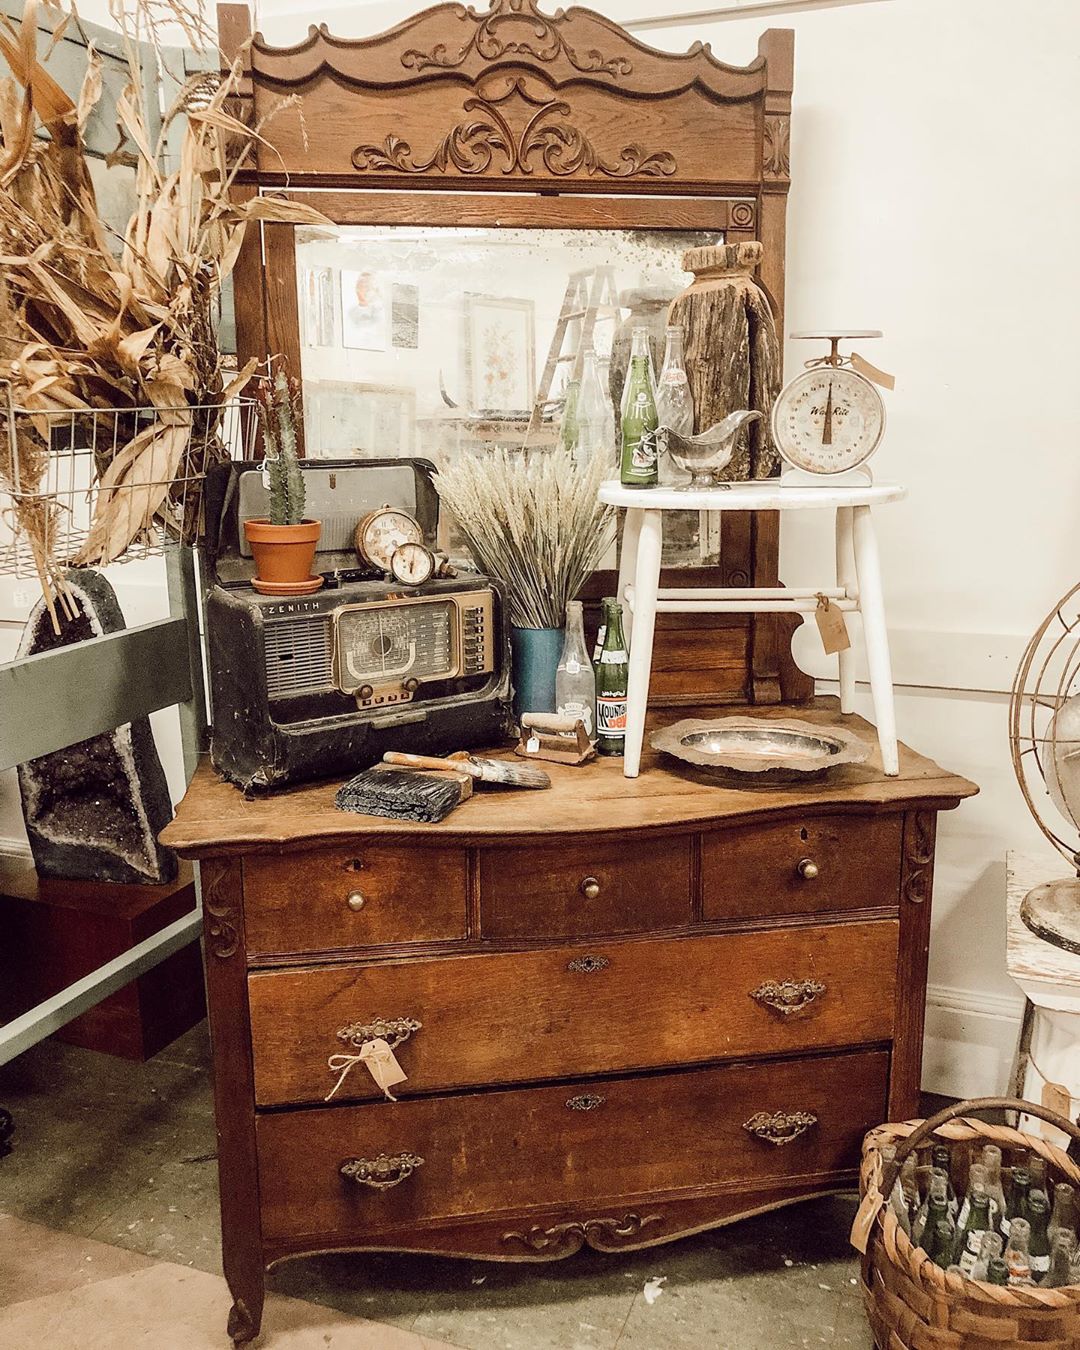 Old brown dresser with antique radio and stool on it. Photo by Instagram user @wattsandcogvl